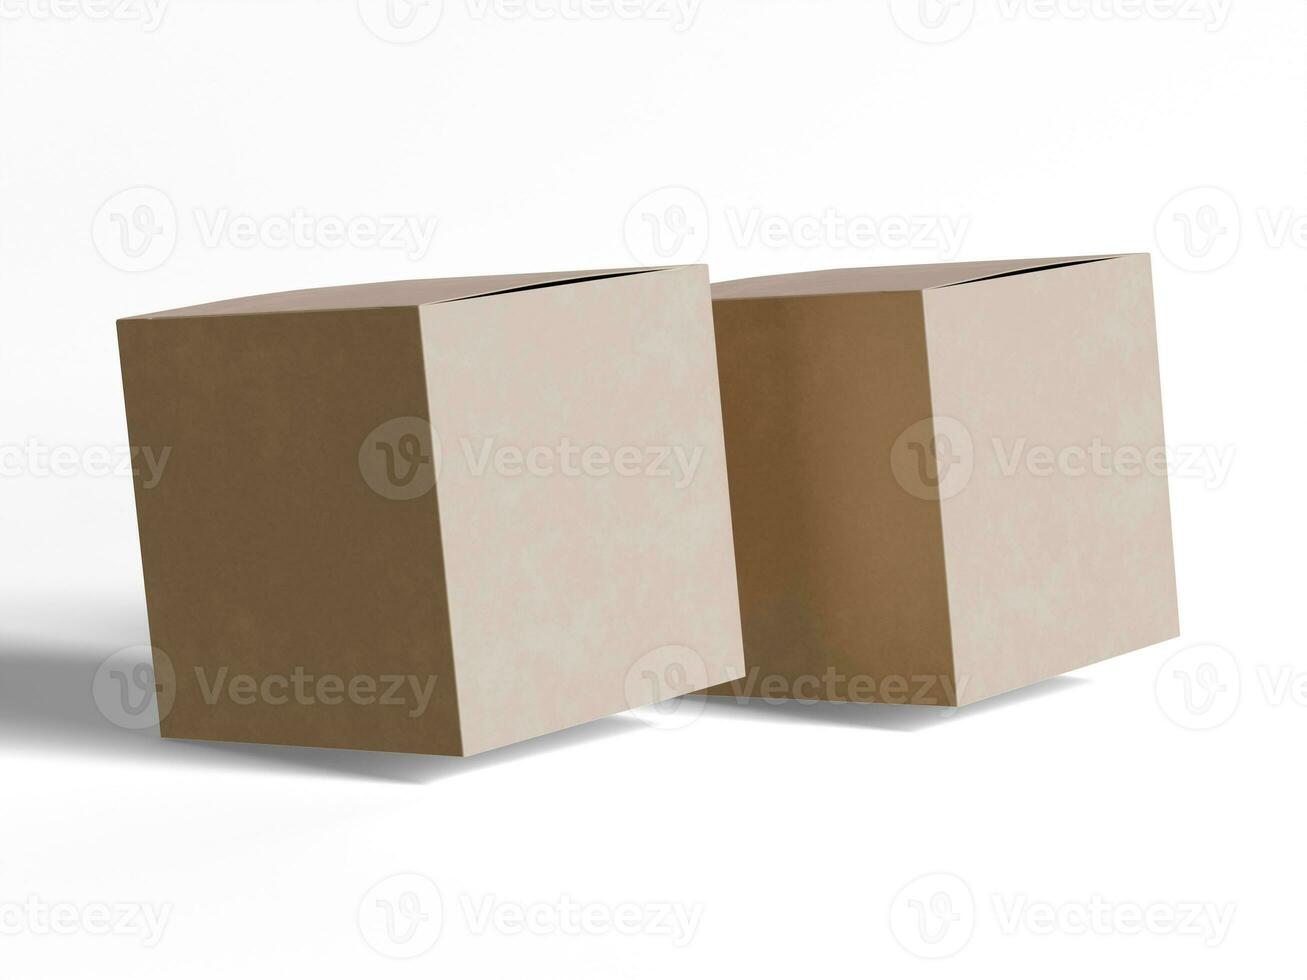 Square box packaging white backgrounnd cardboard paper with realistic texture photo